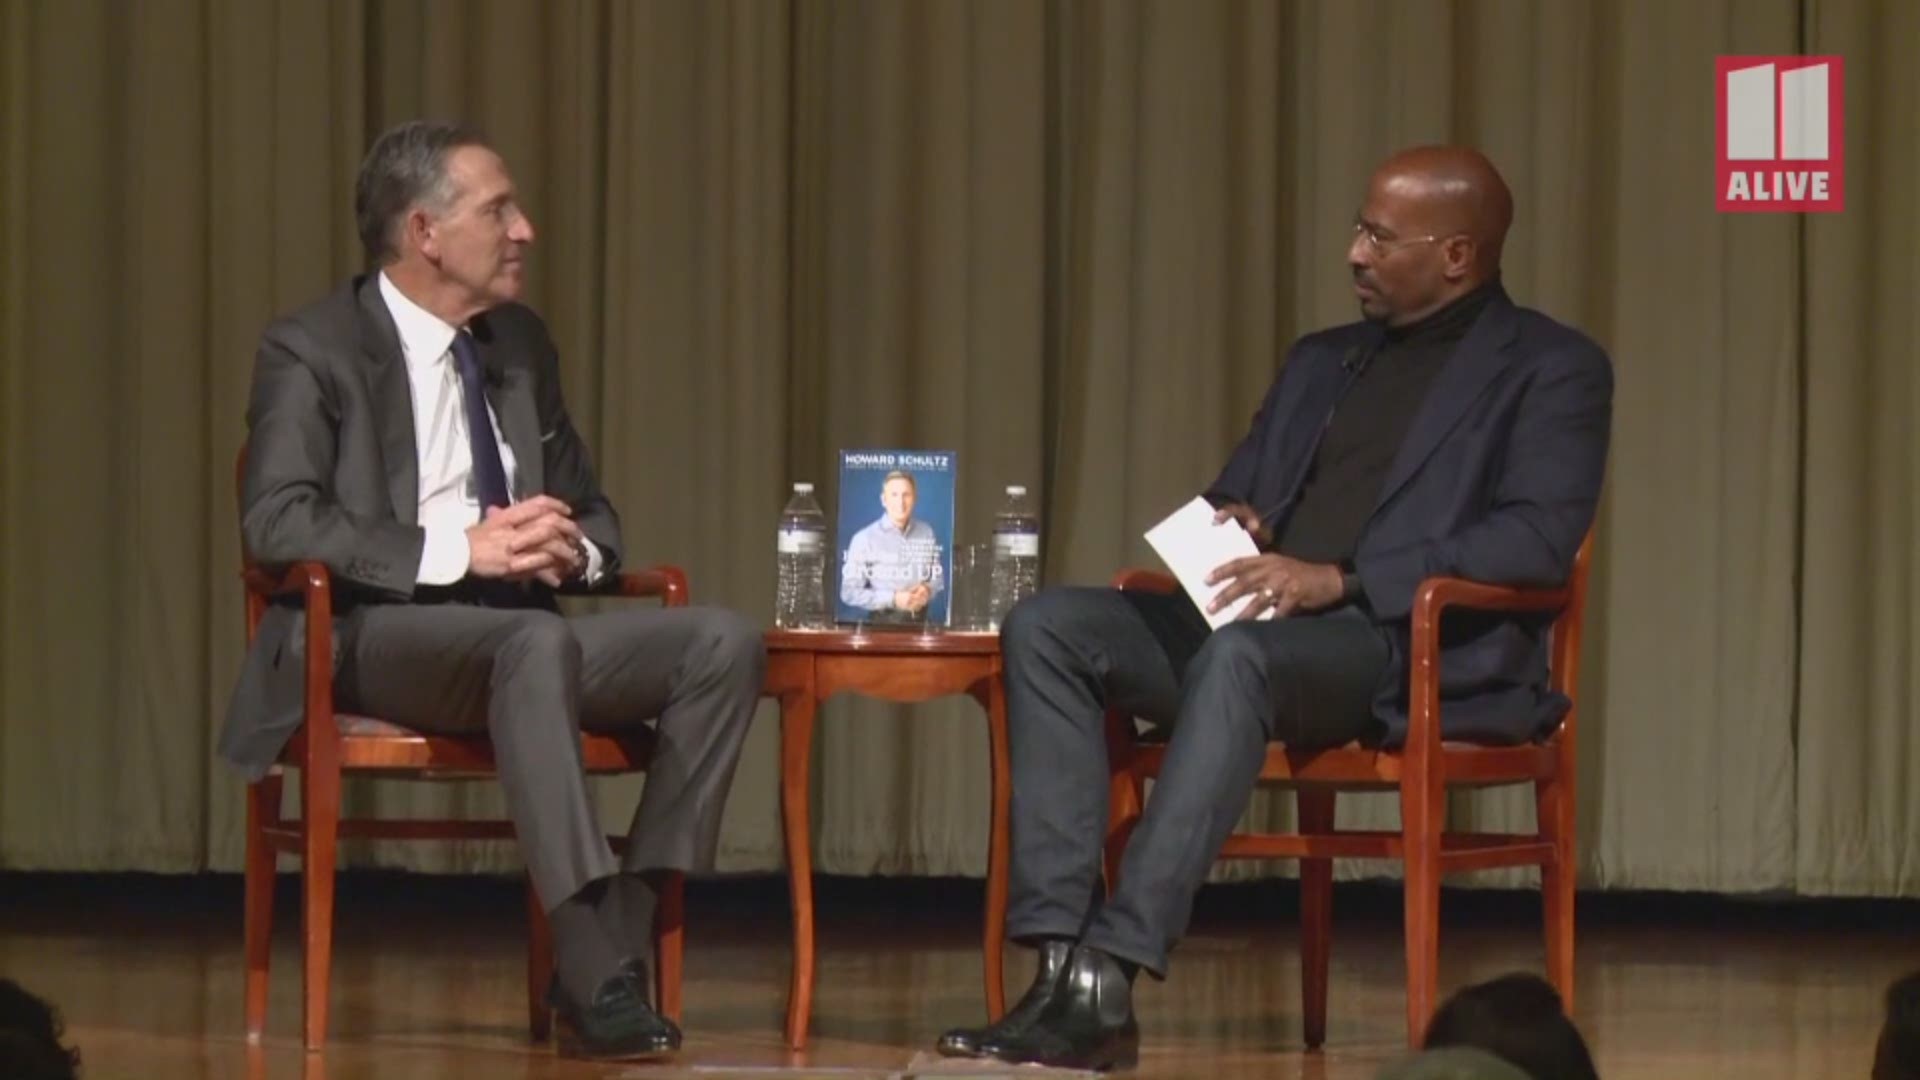 The Starbucks CEO was at the Carter Center in Atlanta March 11 to have a conversation with CNN's Van Jones.